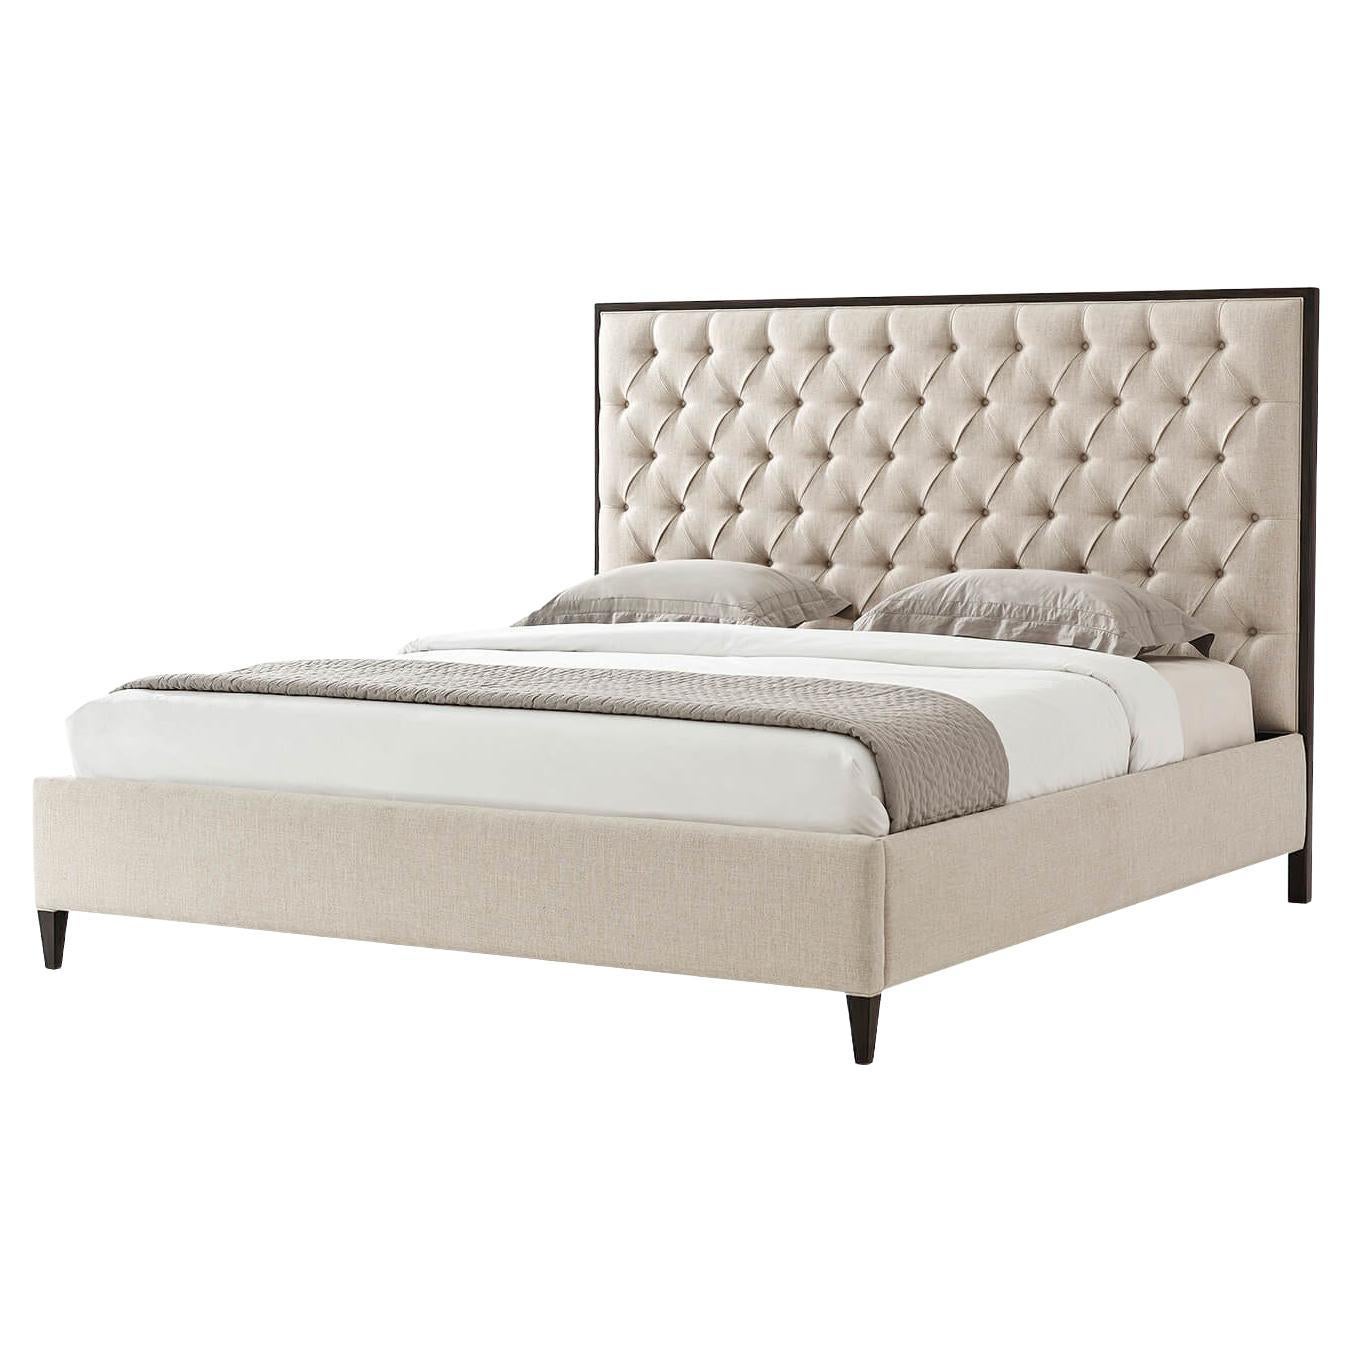 Classic Modern King Size Bed